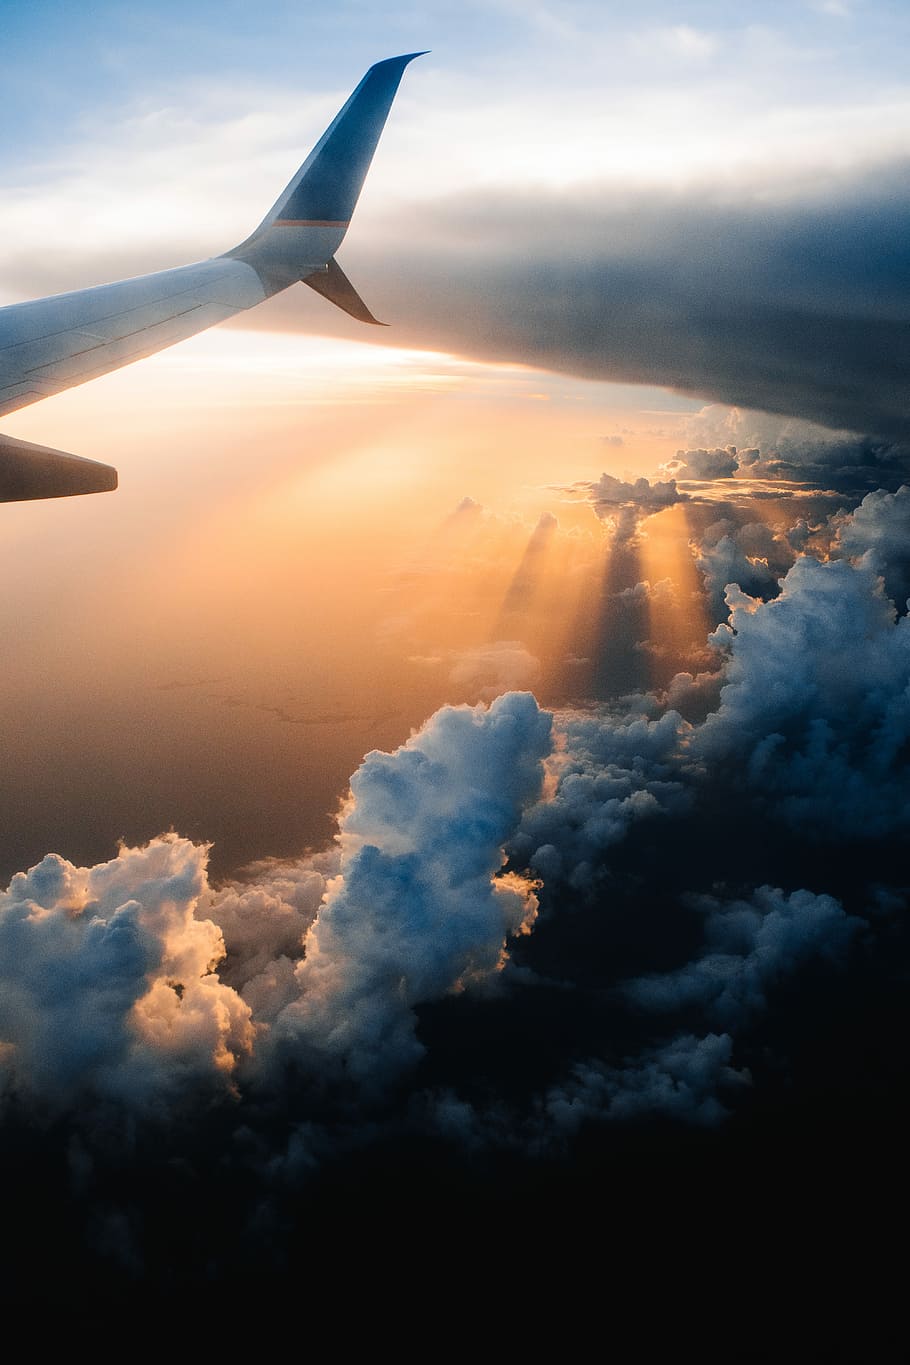 HD wallpaper: airplane on sky during golden hour, airplane flying on sky,  cloud | Wallpaper Flare